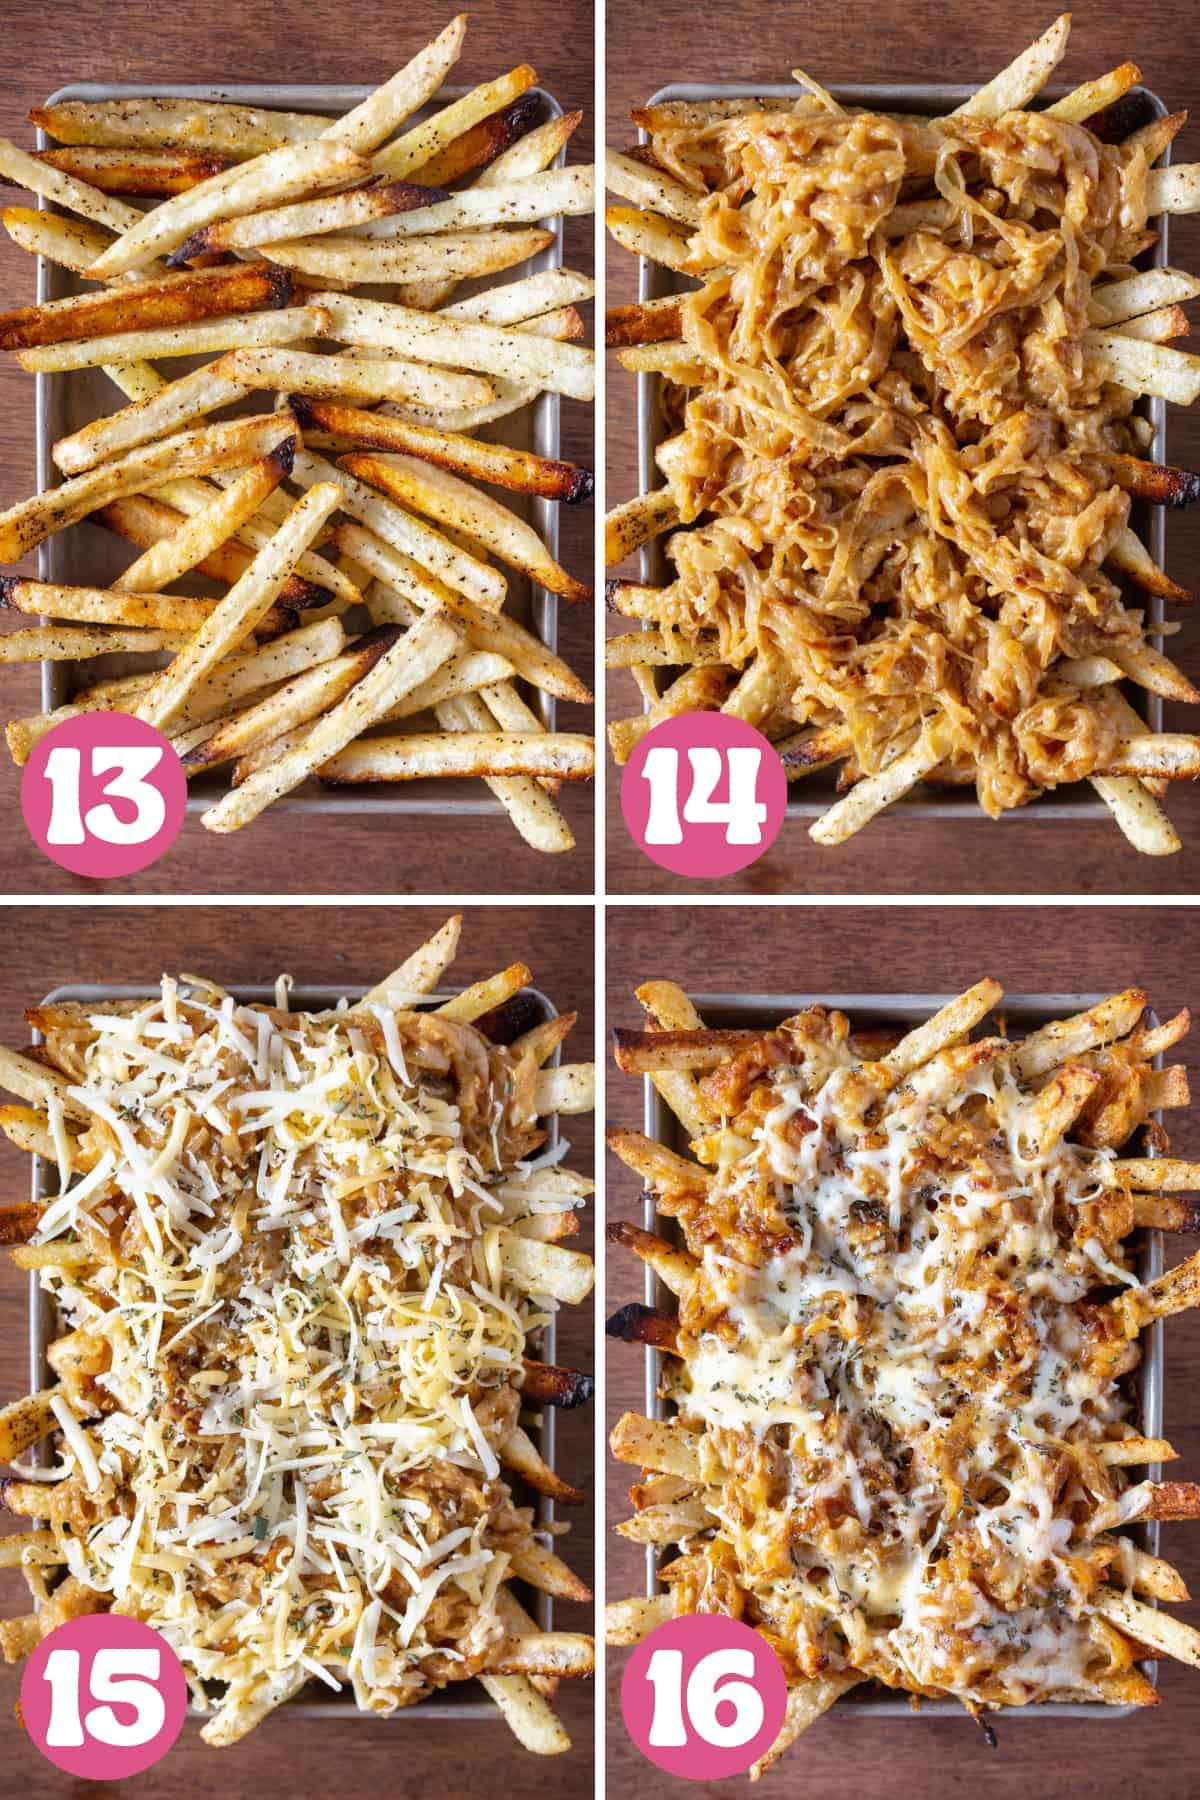 Four pictures in a collage to show steps 13 through 16 of making french onion fries